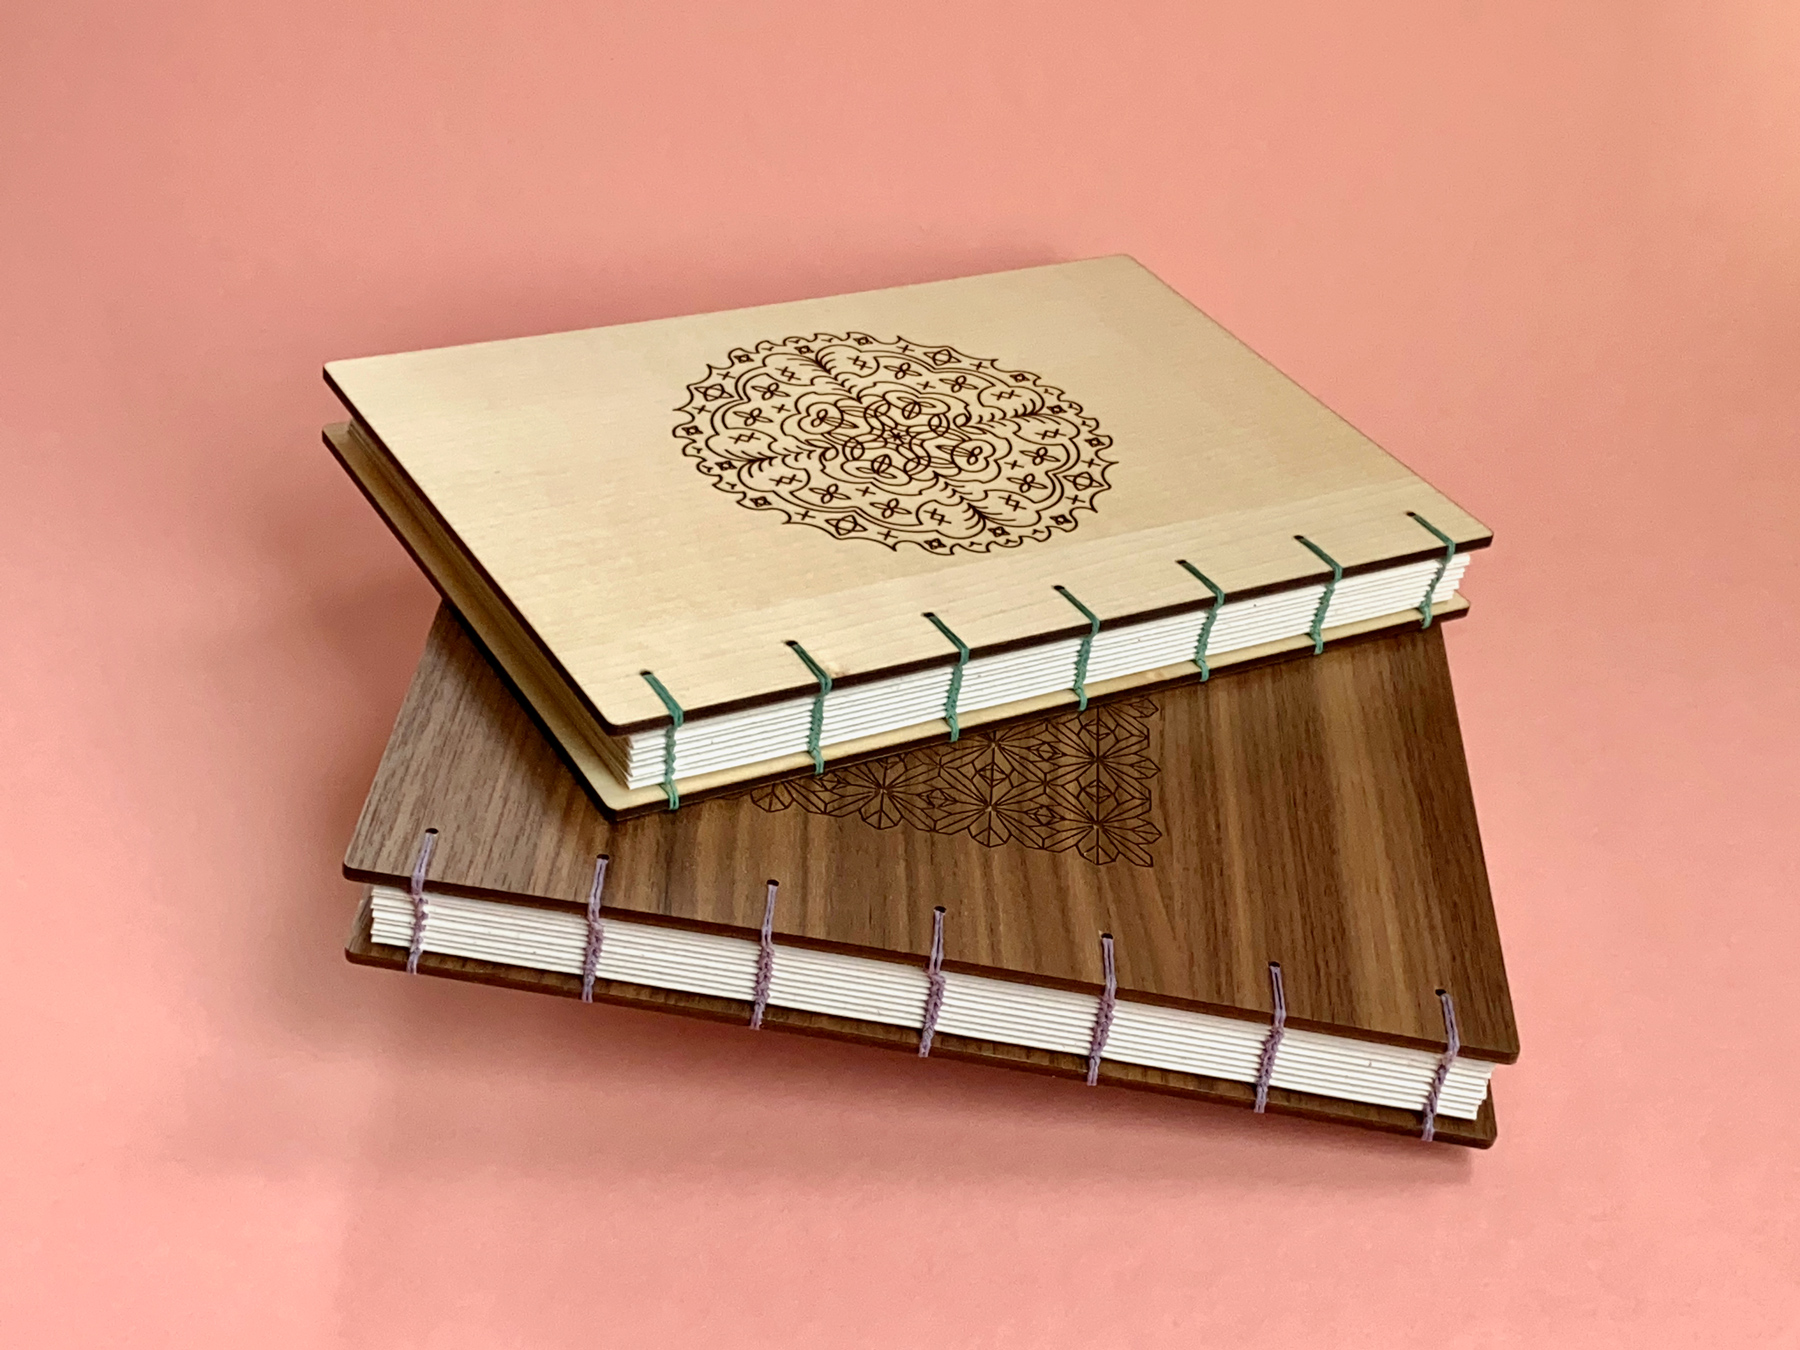 Two coptic-bound books one maple, one walnut lay on top of each other against a rose pink background.